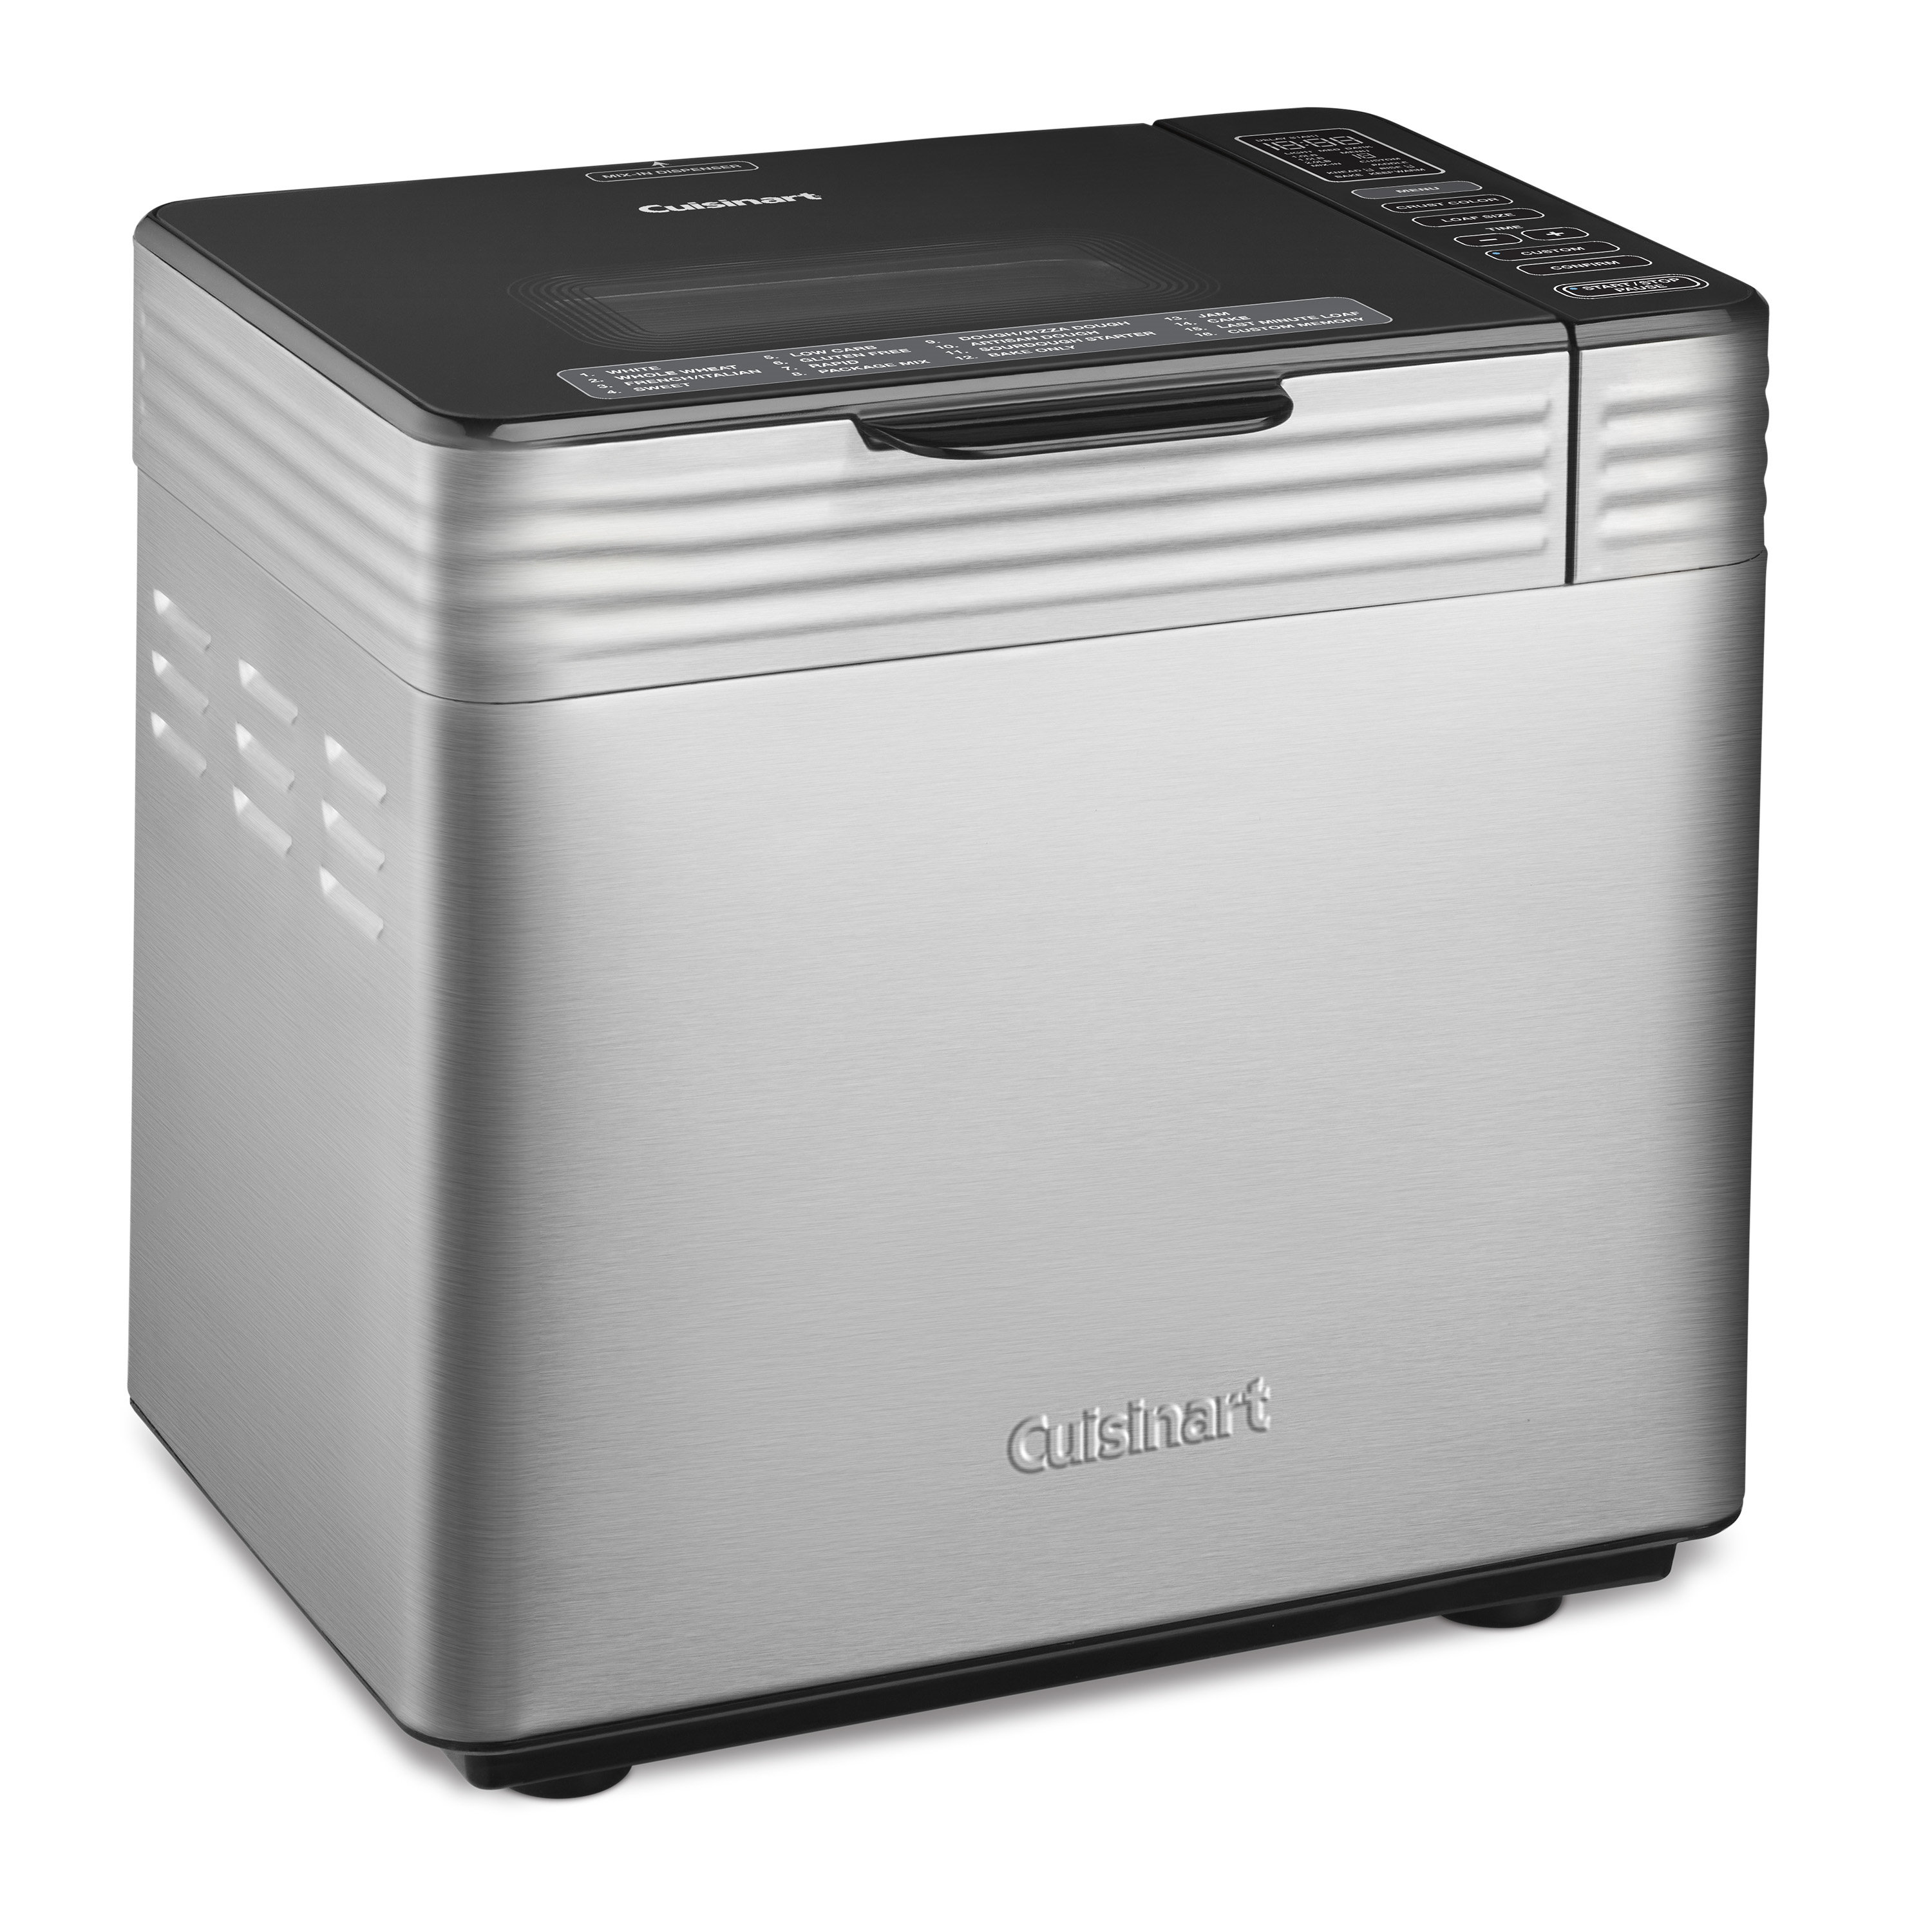 Cuisinart Compact Automatic 2 lbs. Bread Maker